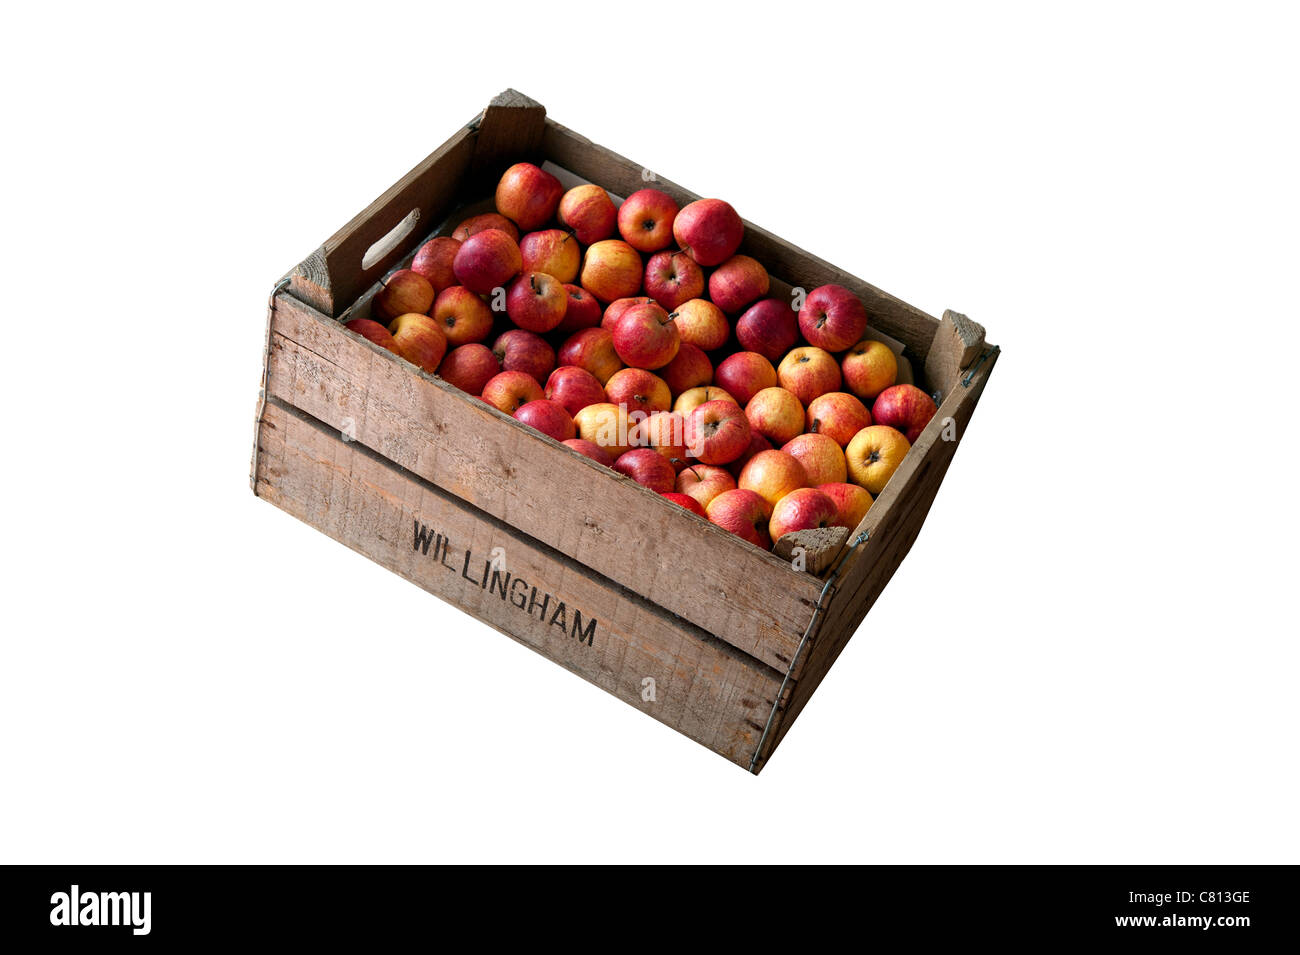 Bushel box with red apples in. Traditional fruit storage method. Stock Photo